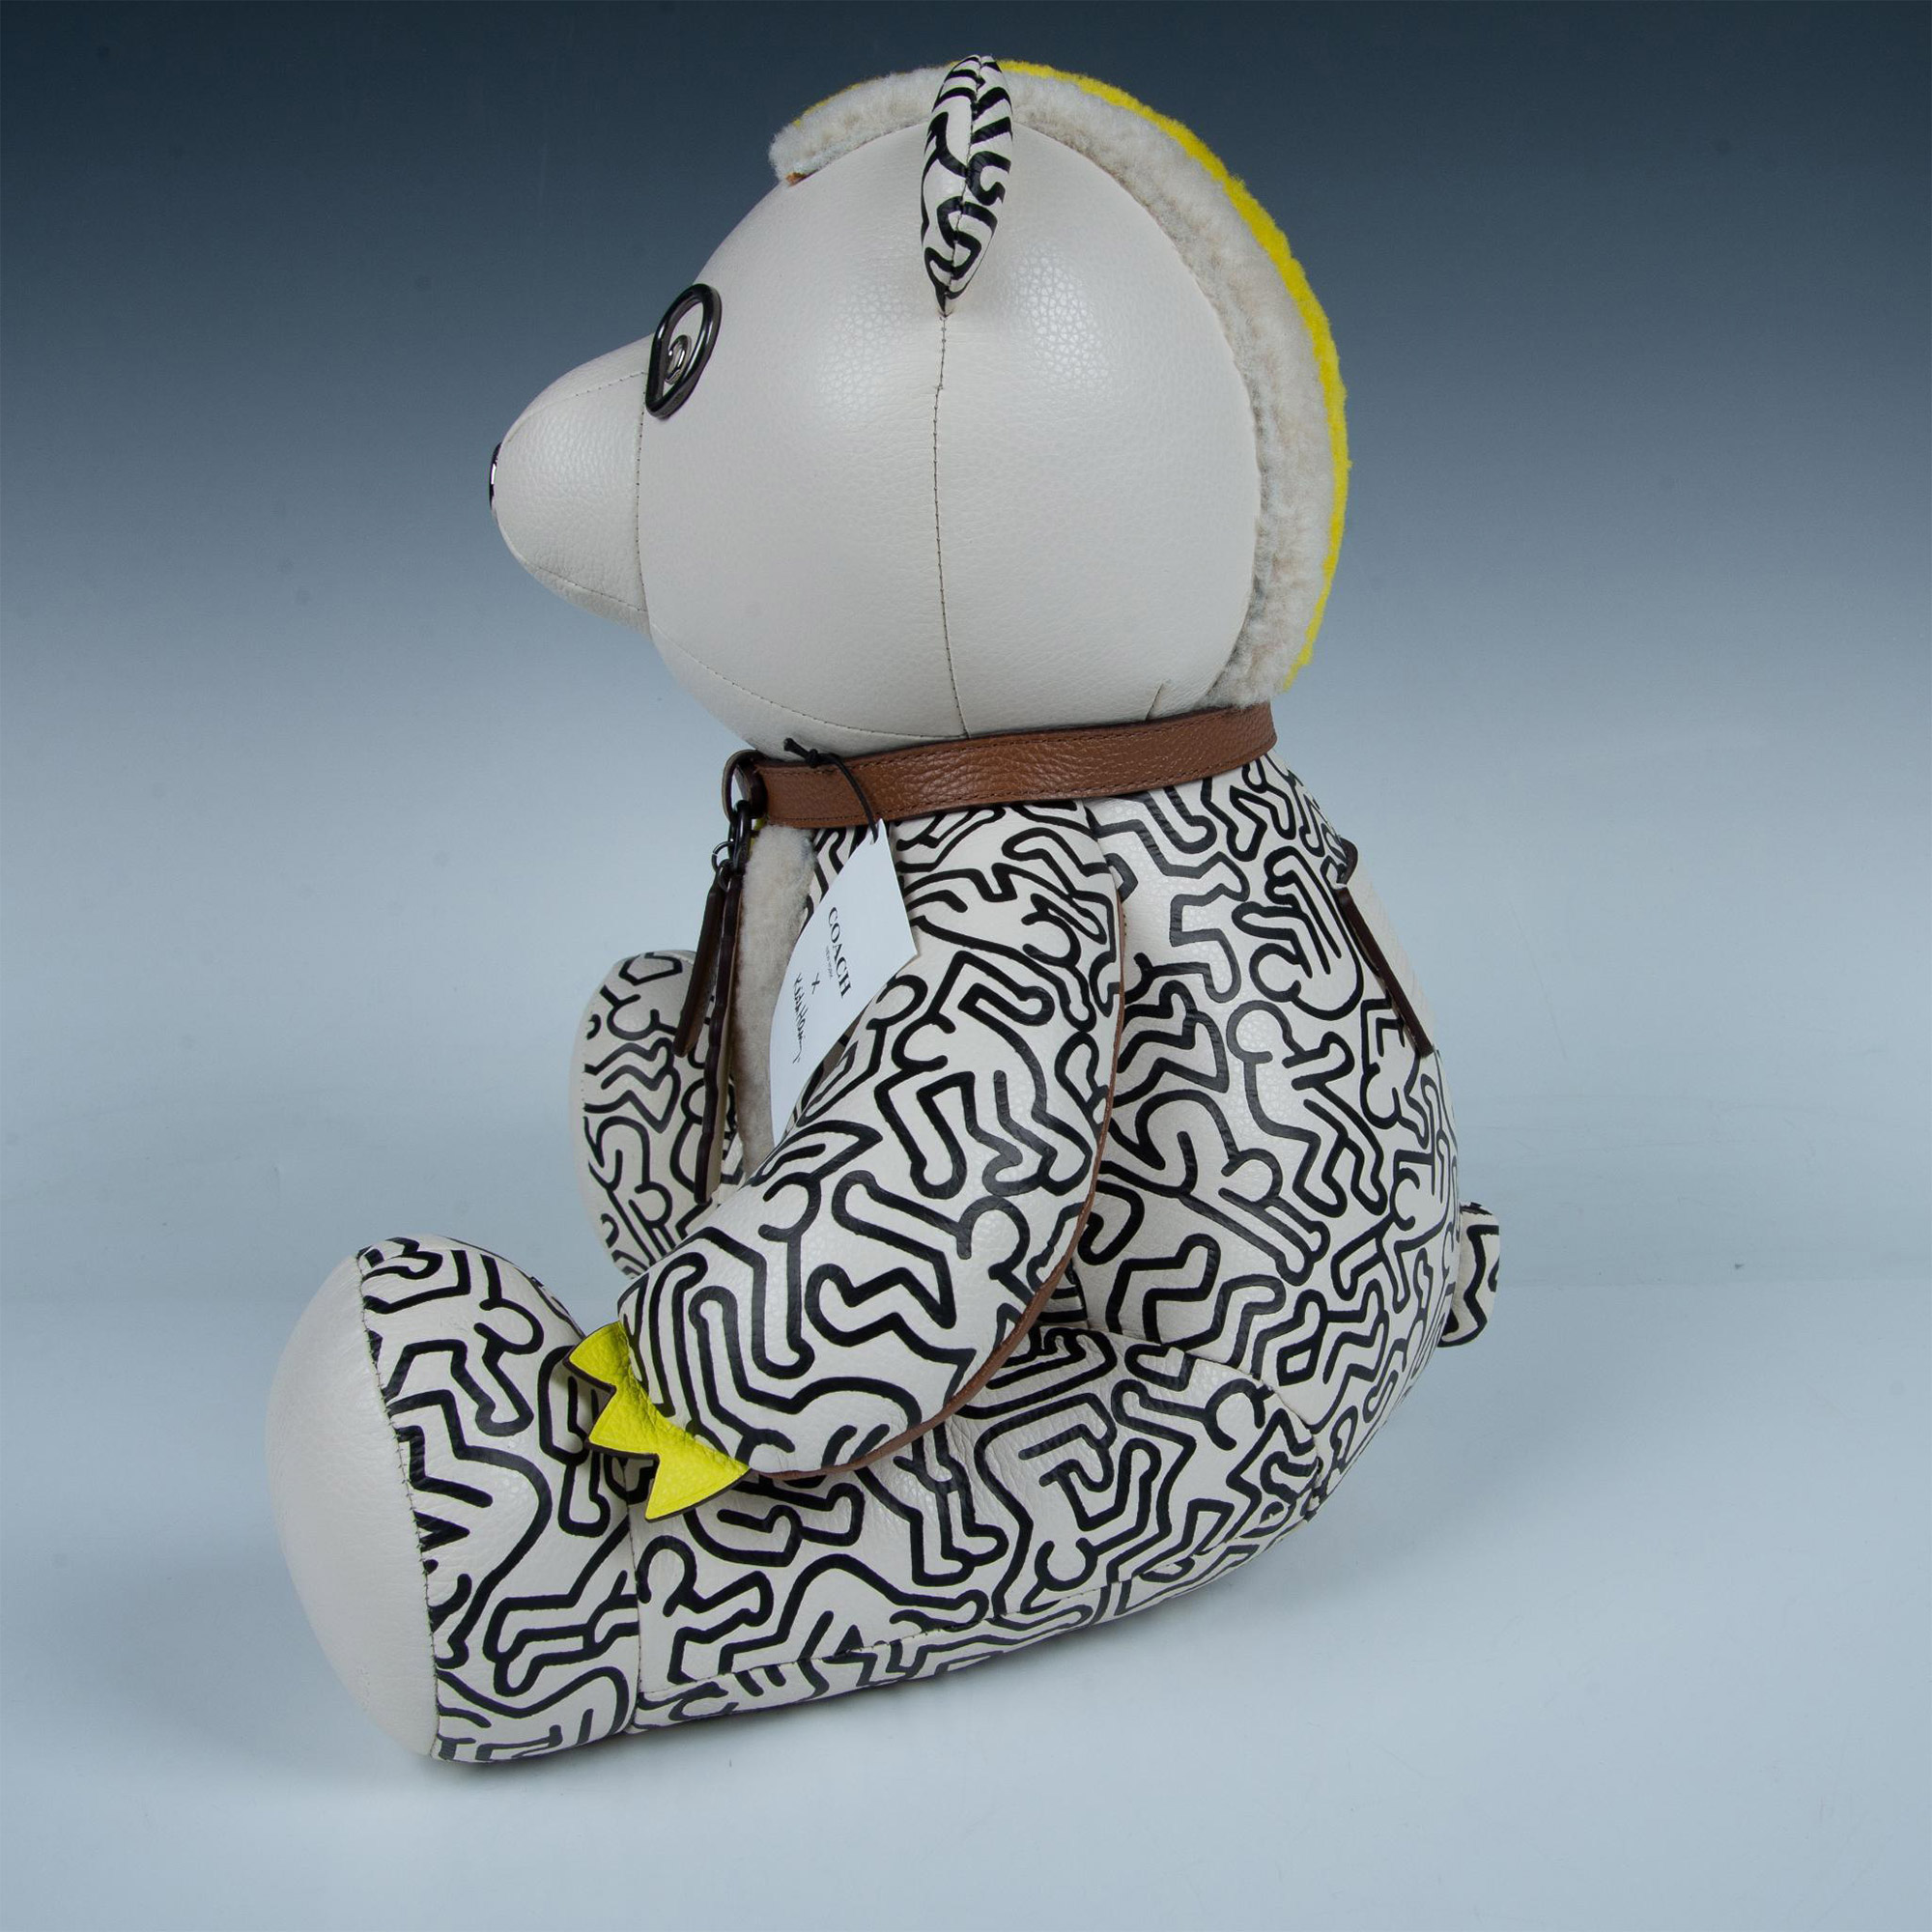 Coach Keith Haring Collaboration Plush Leather Teddy Bear - Image 7 of 8